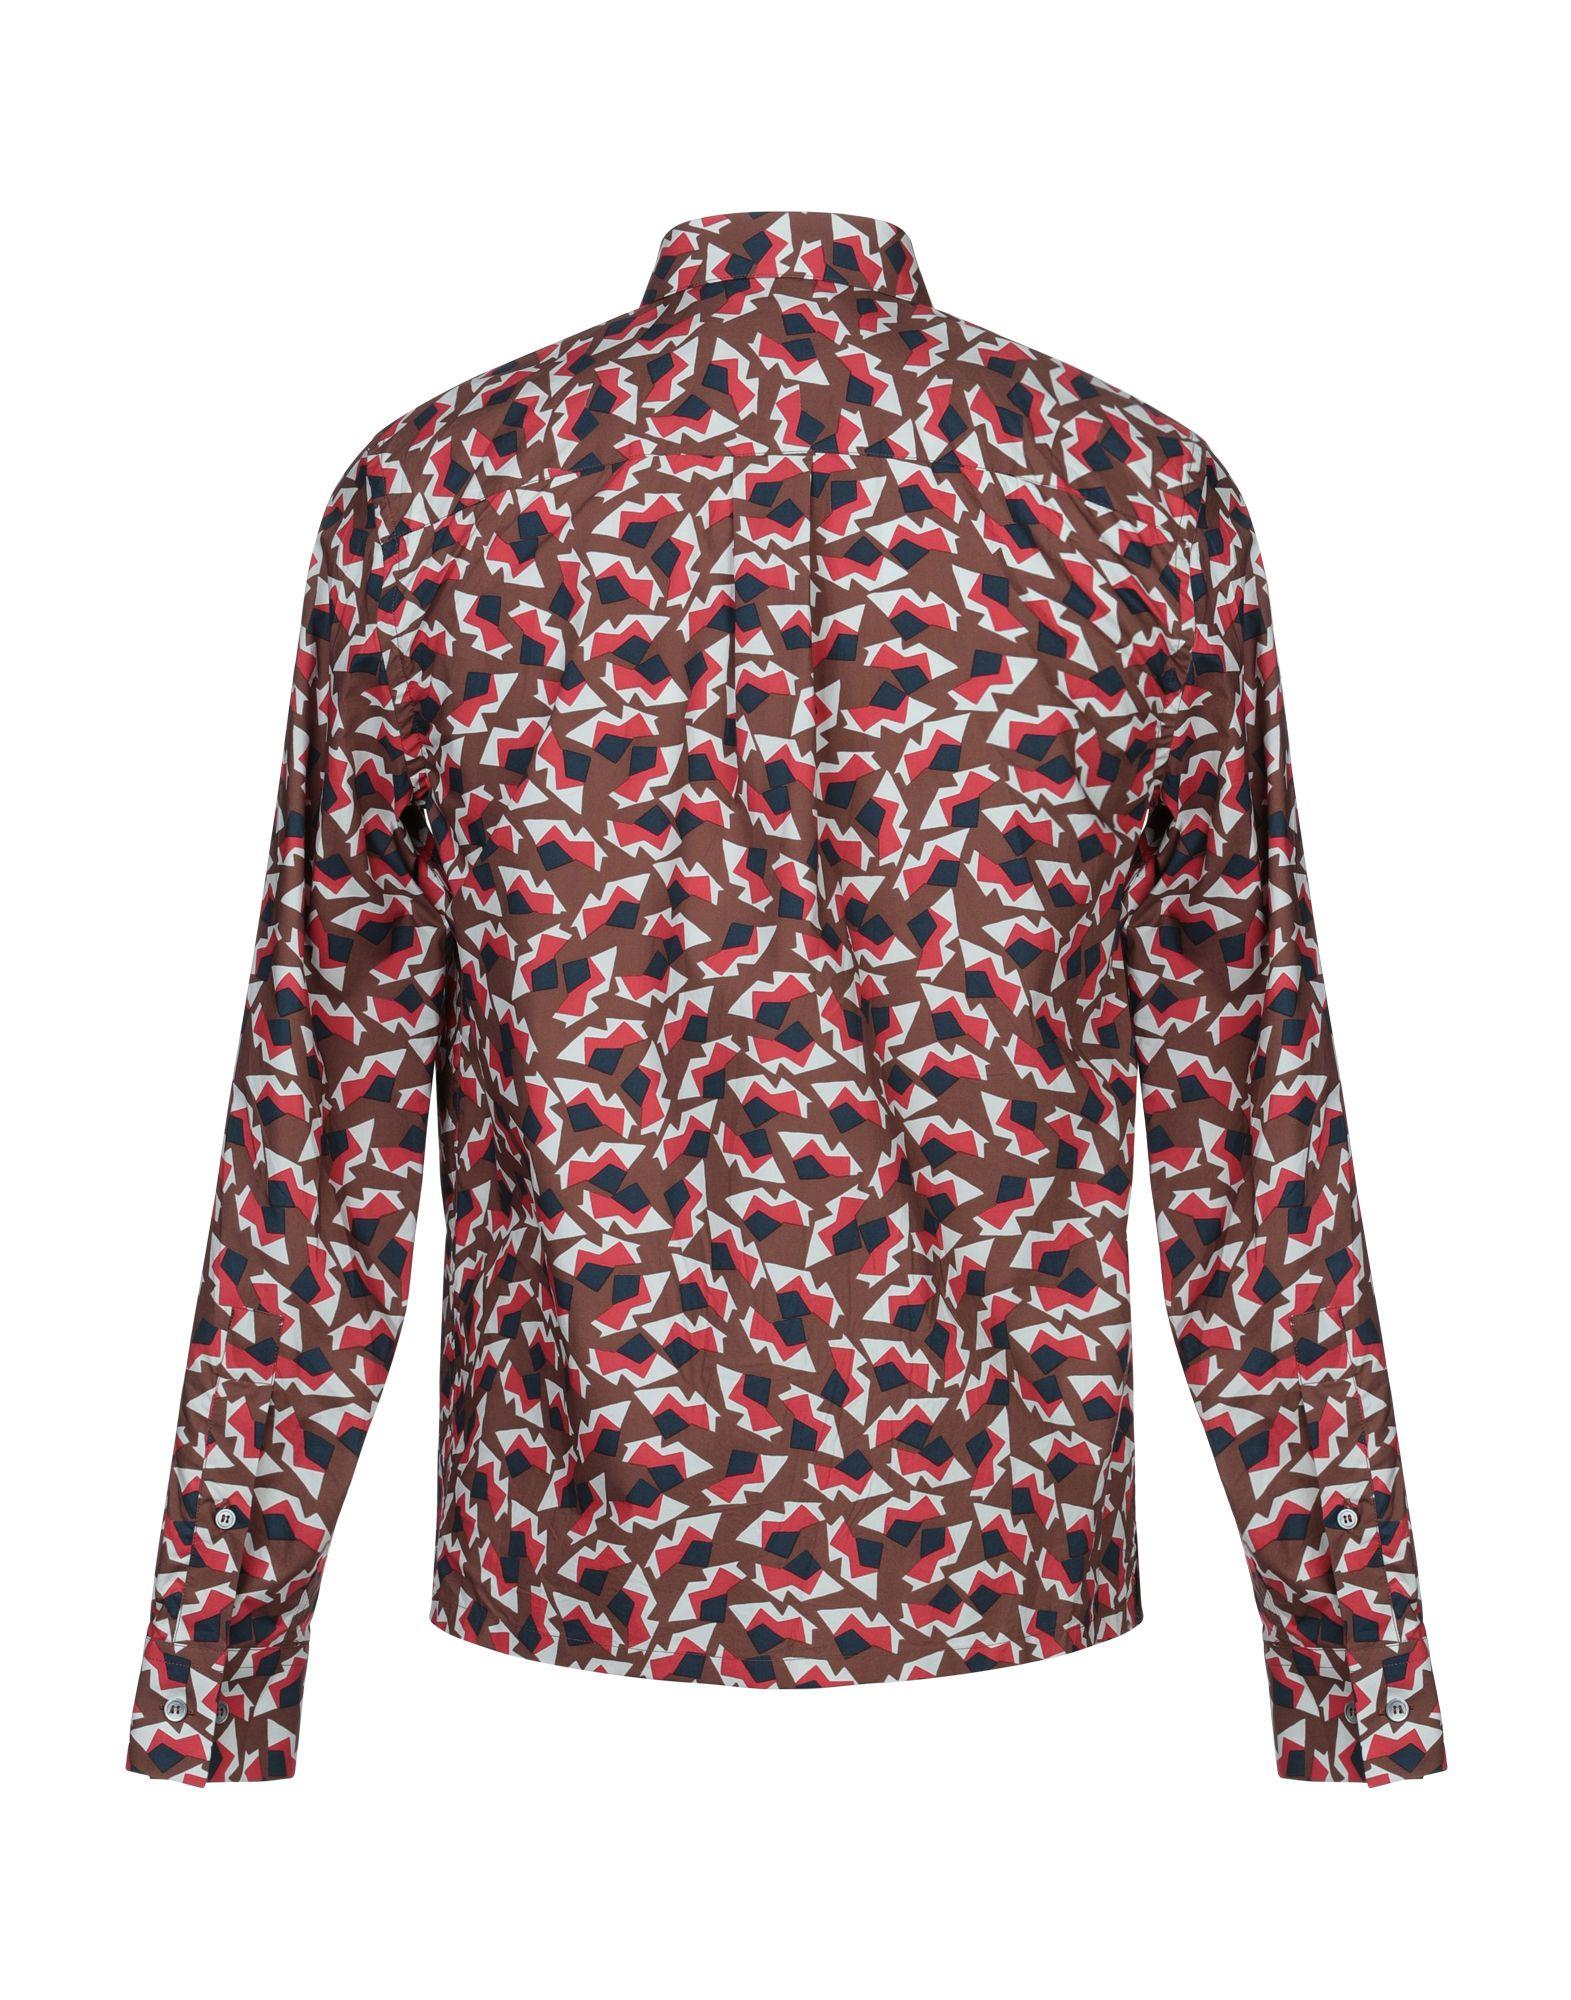 Marni Shirt in Brown for Men - Lyst